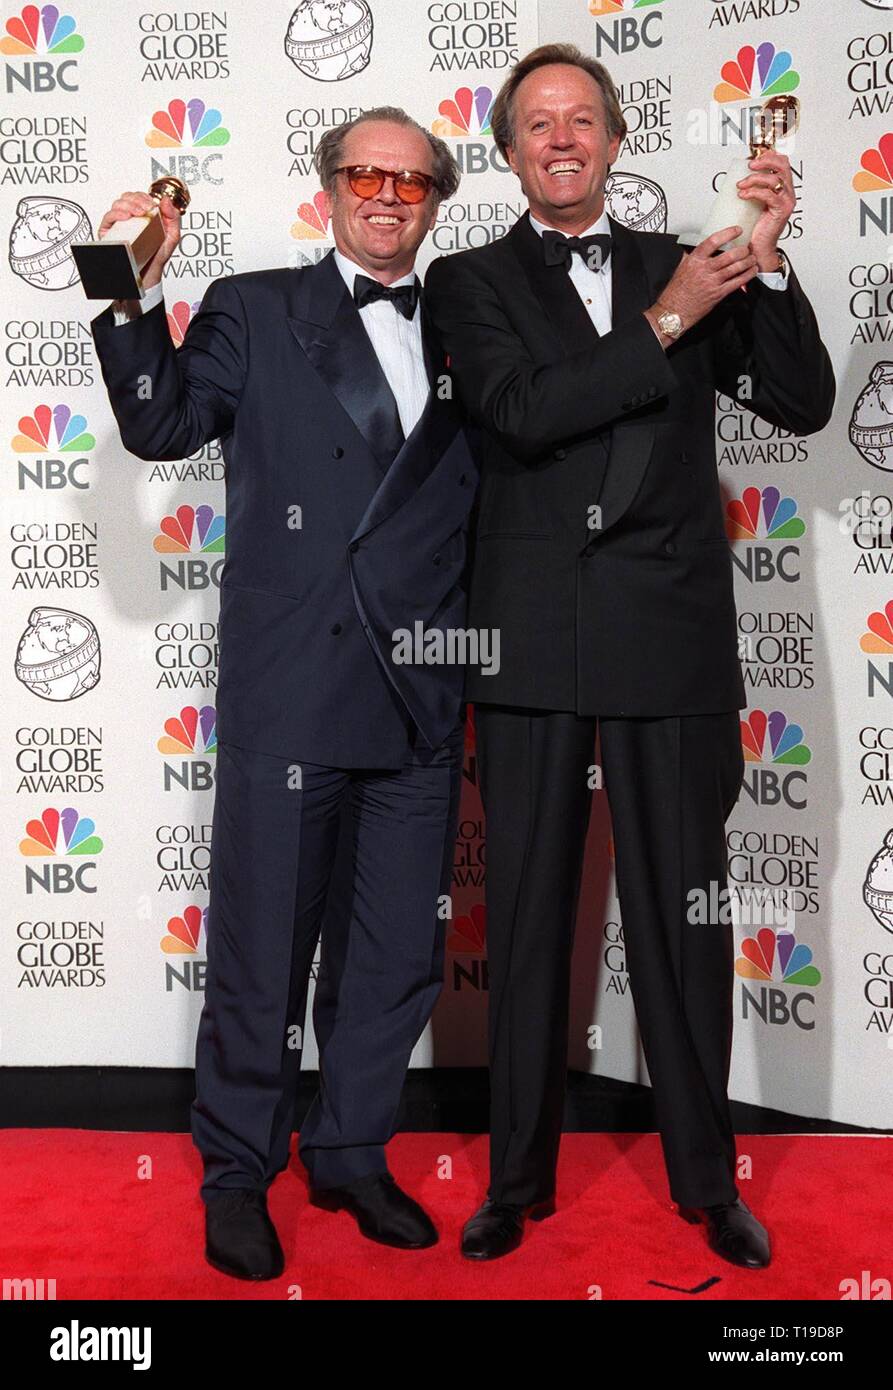 LOS ANGELES, CA - January 18, 1998: Actors JACK NICHOLSON & PETER FONDA at the Golden Globe Awards where they won Best Movie Actor awards for 'As Good As It Gets' (Nicholson) & 'Ulee's Gold' (Fonda). Stock Photo